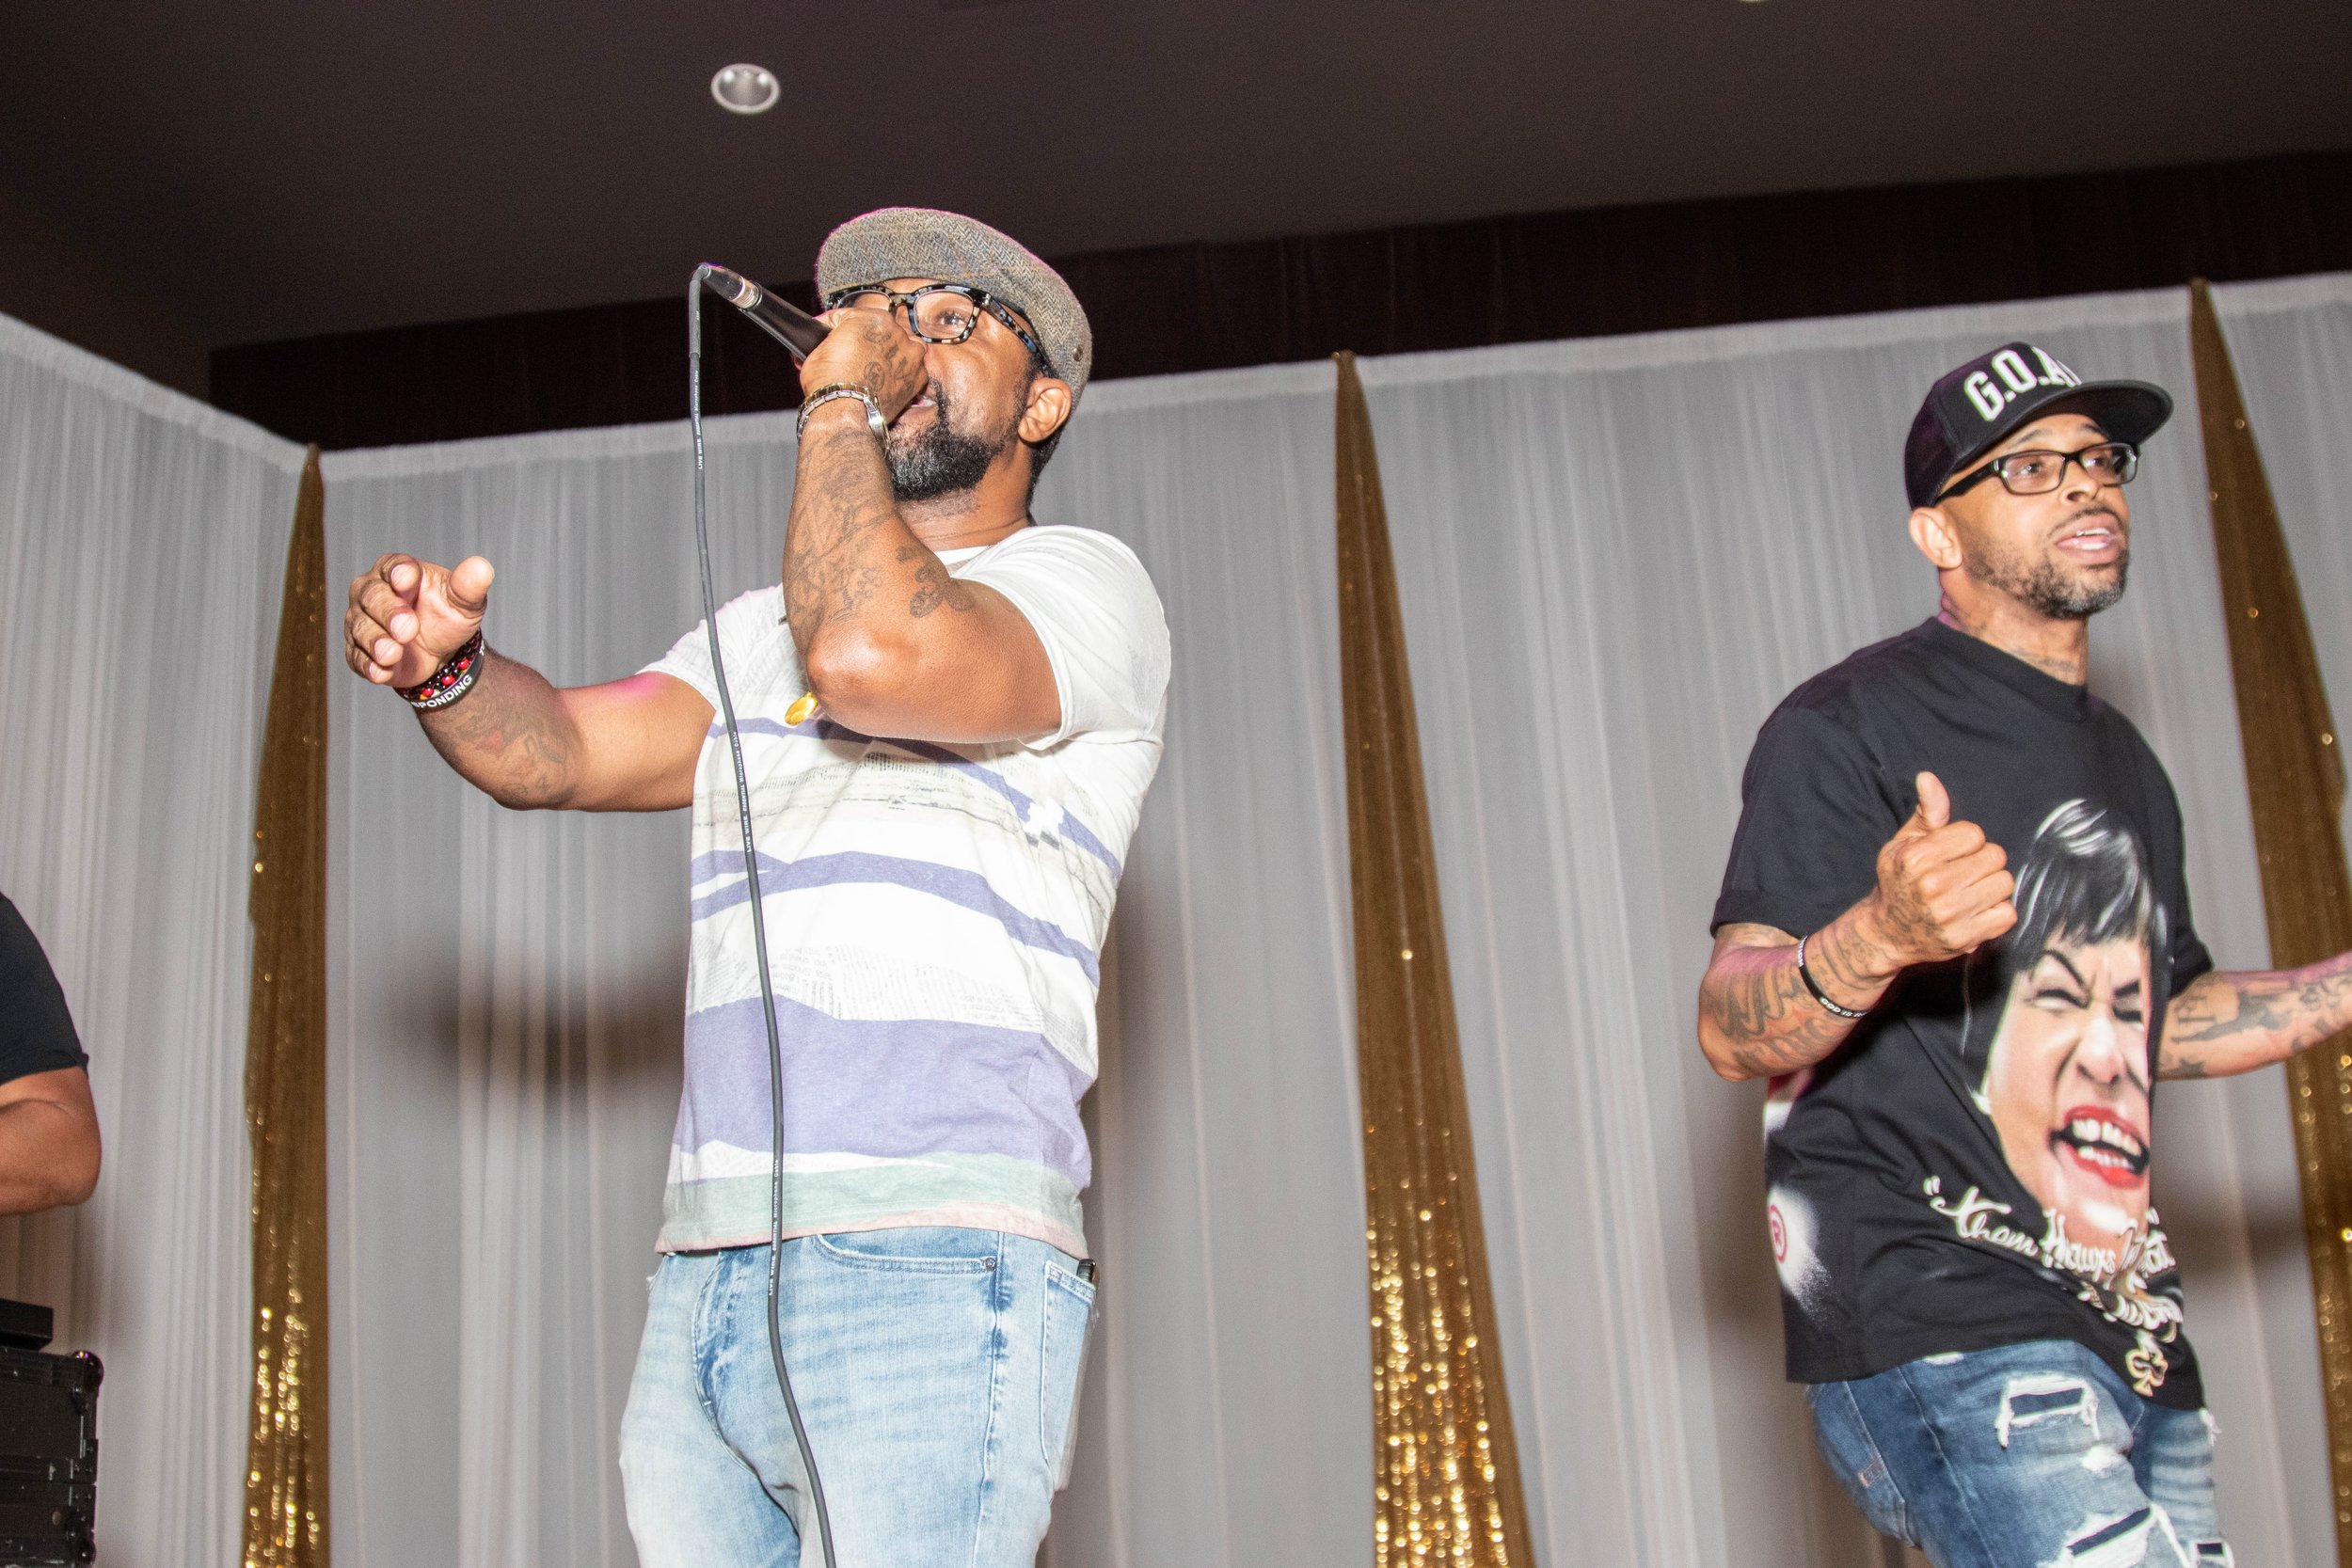 The renowned rap duo Partners N Crime (PNC) performs at the Sneaker Ball, energizing the crowd of McD 35 alumni.